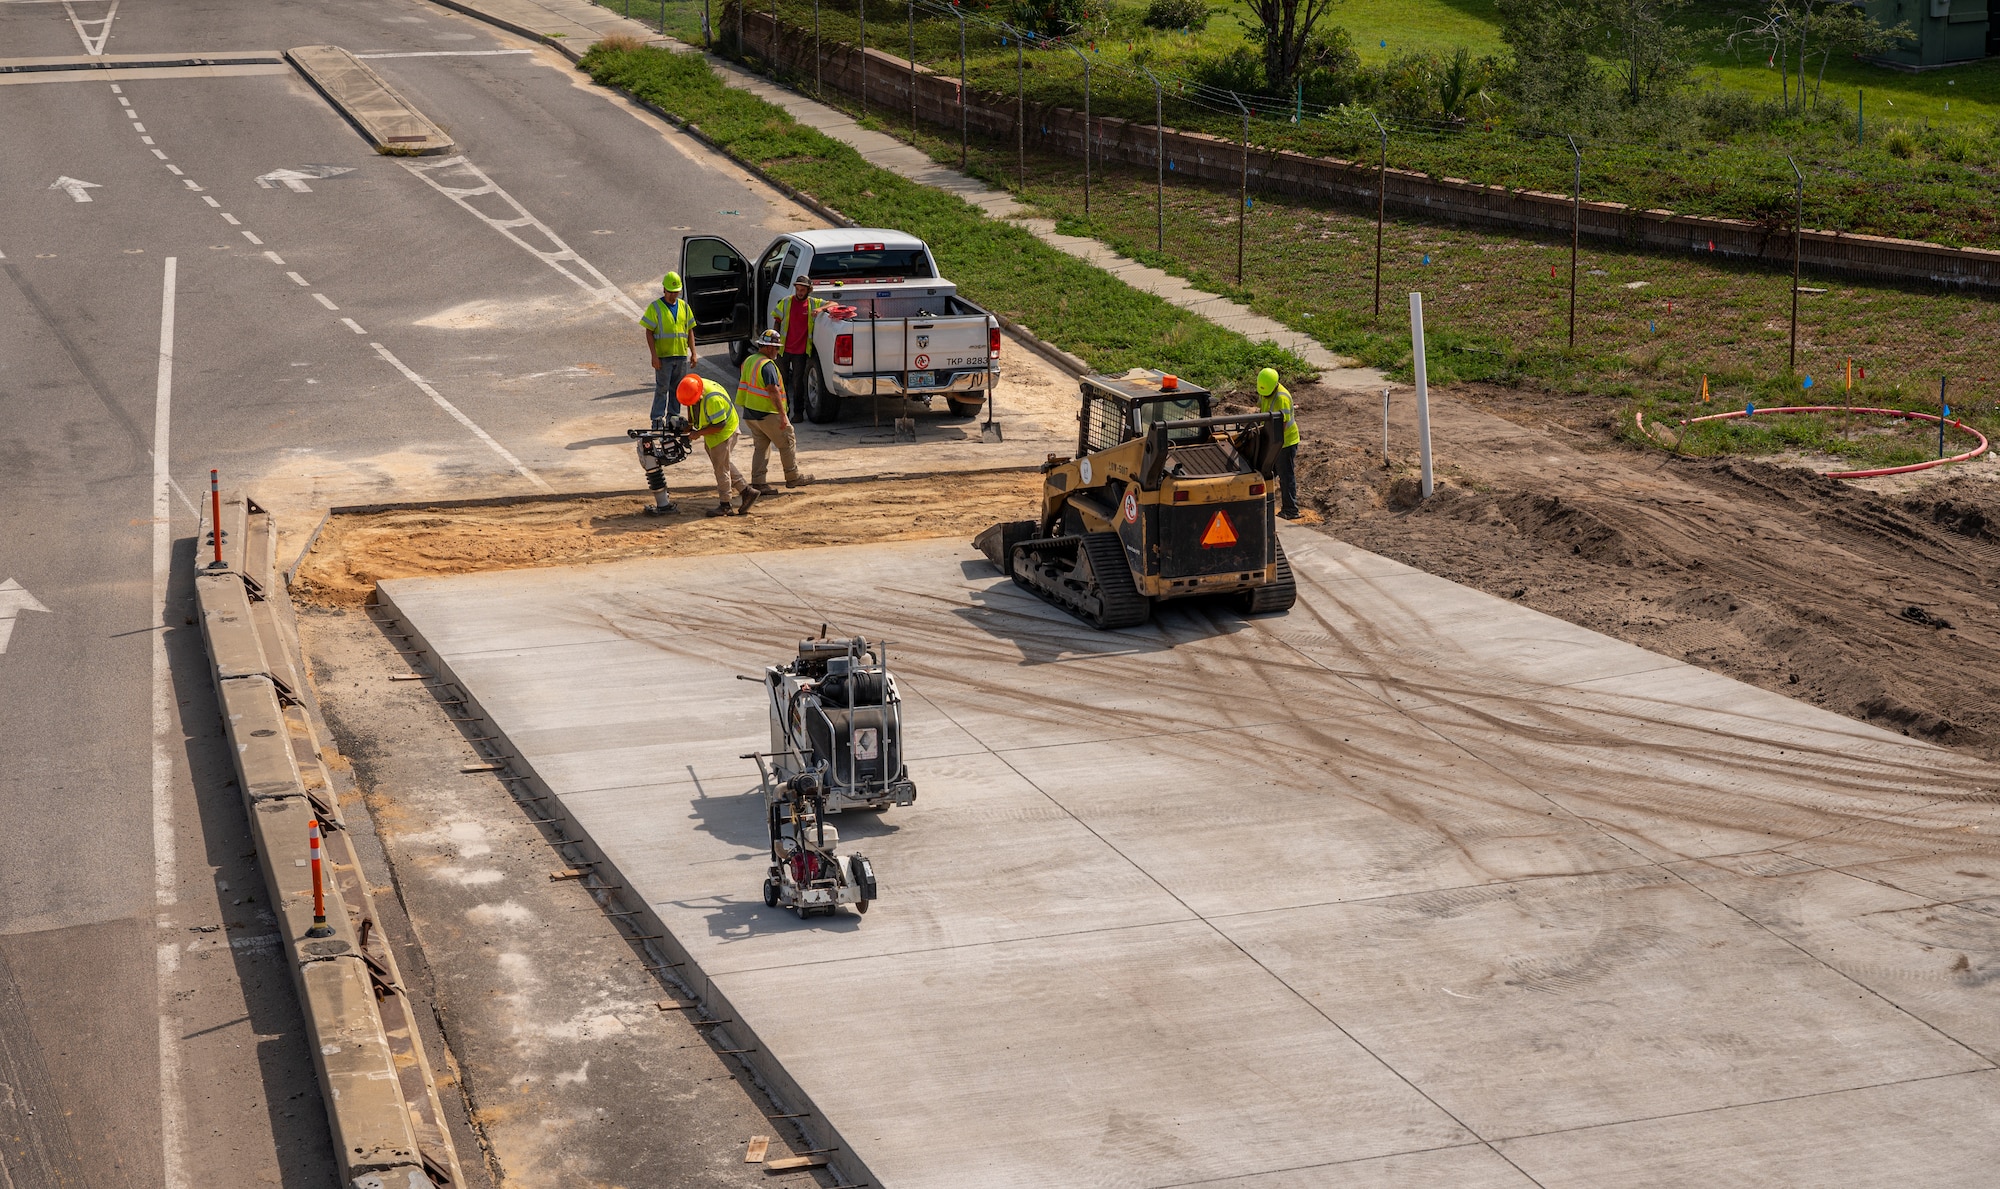 Construction workers operate on concrete slabs